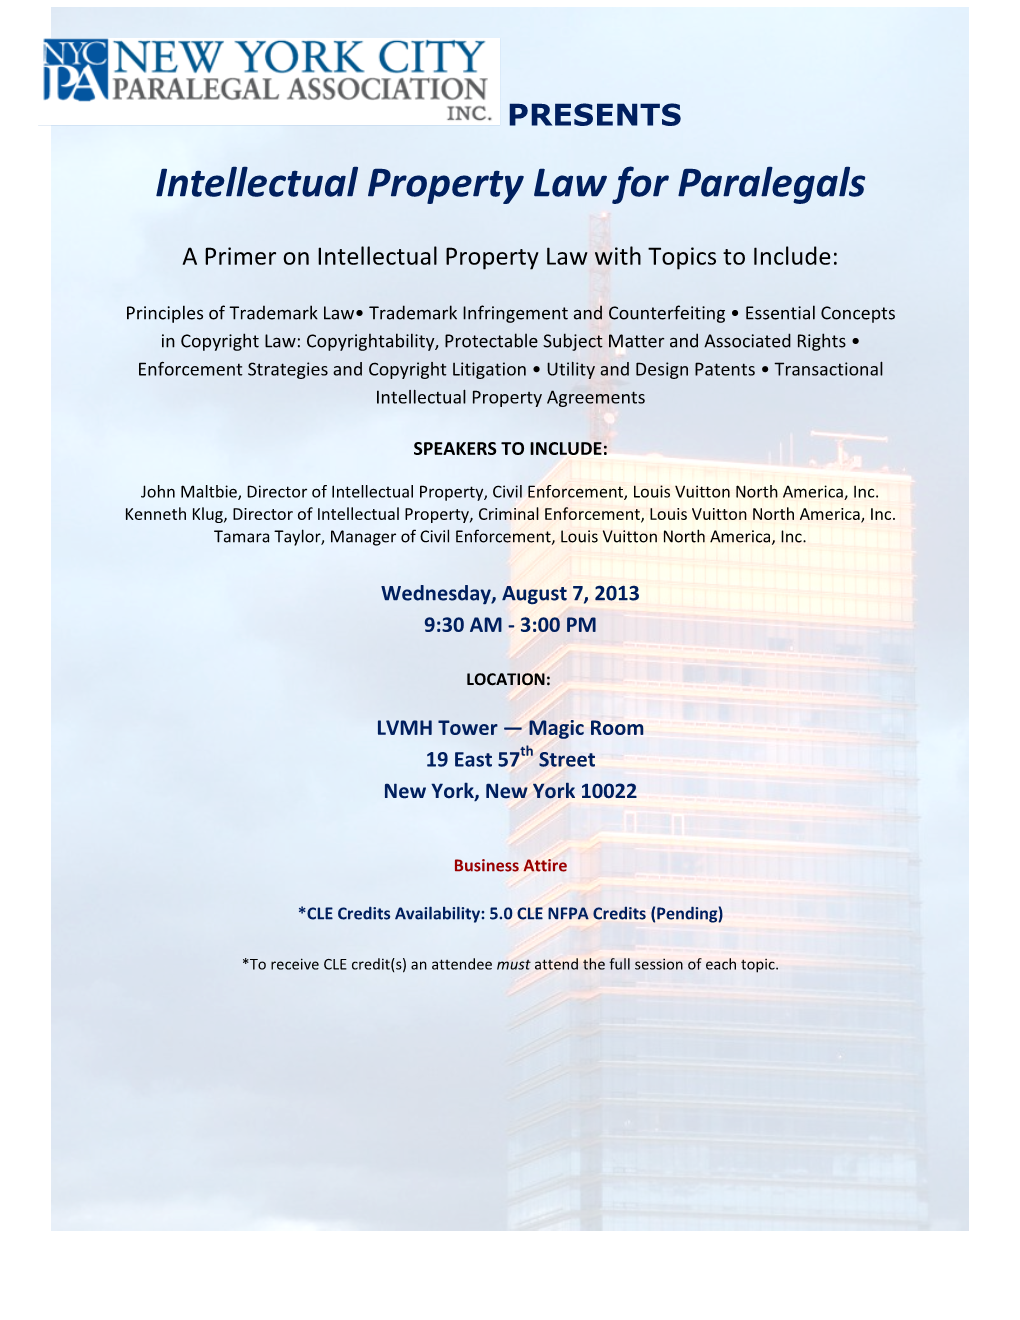 Intellectual Property Law for Paralegals